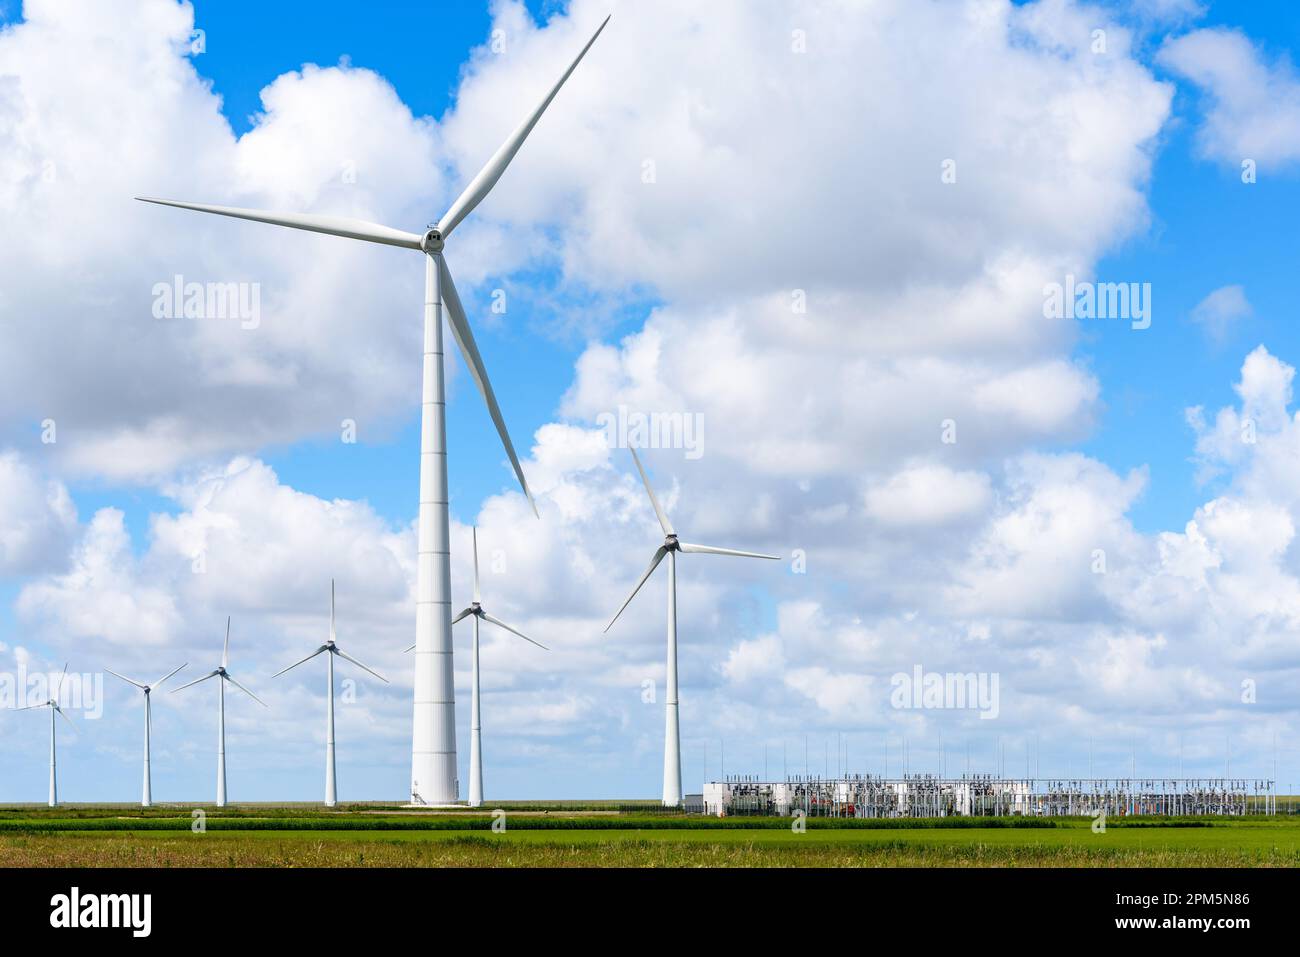 Wind park with tall wind turbines and an electricity substation under blue sky with clouds in summer Stock Photo